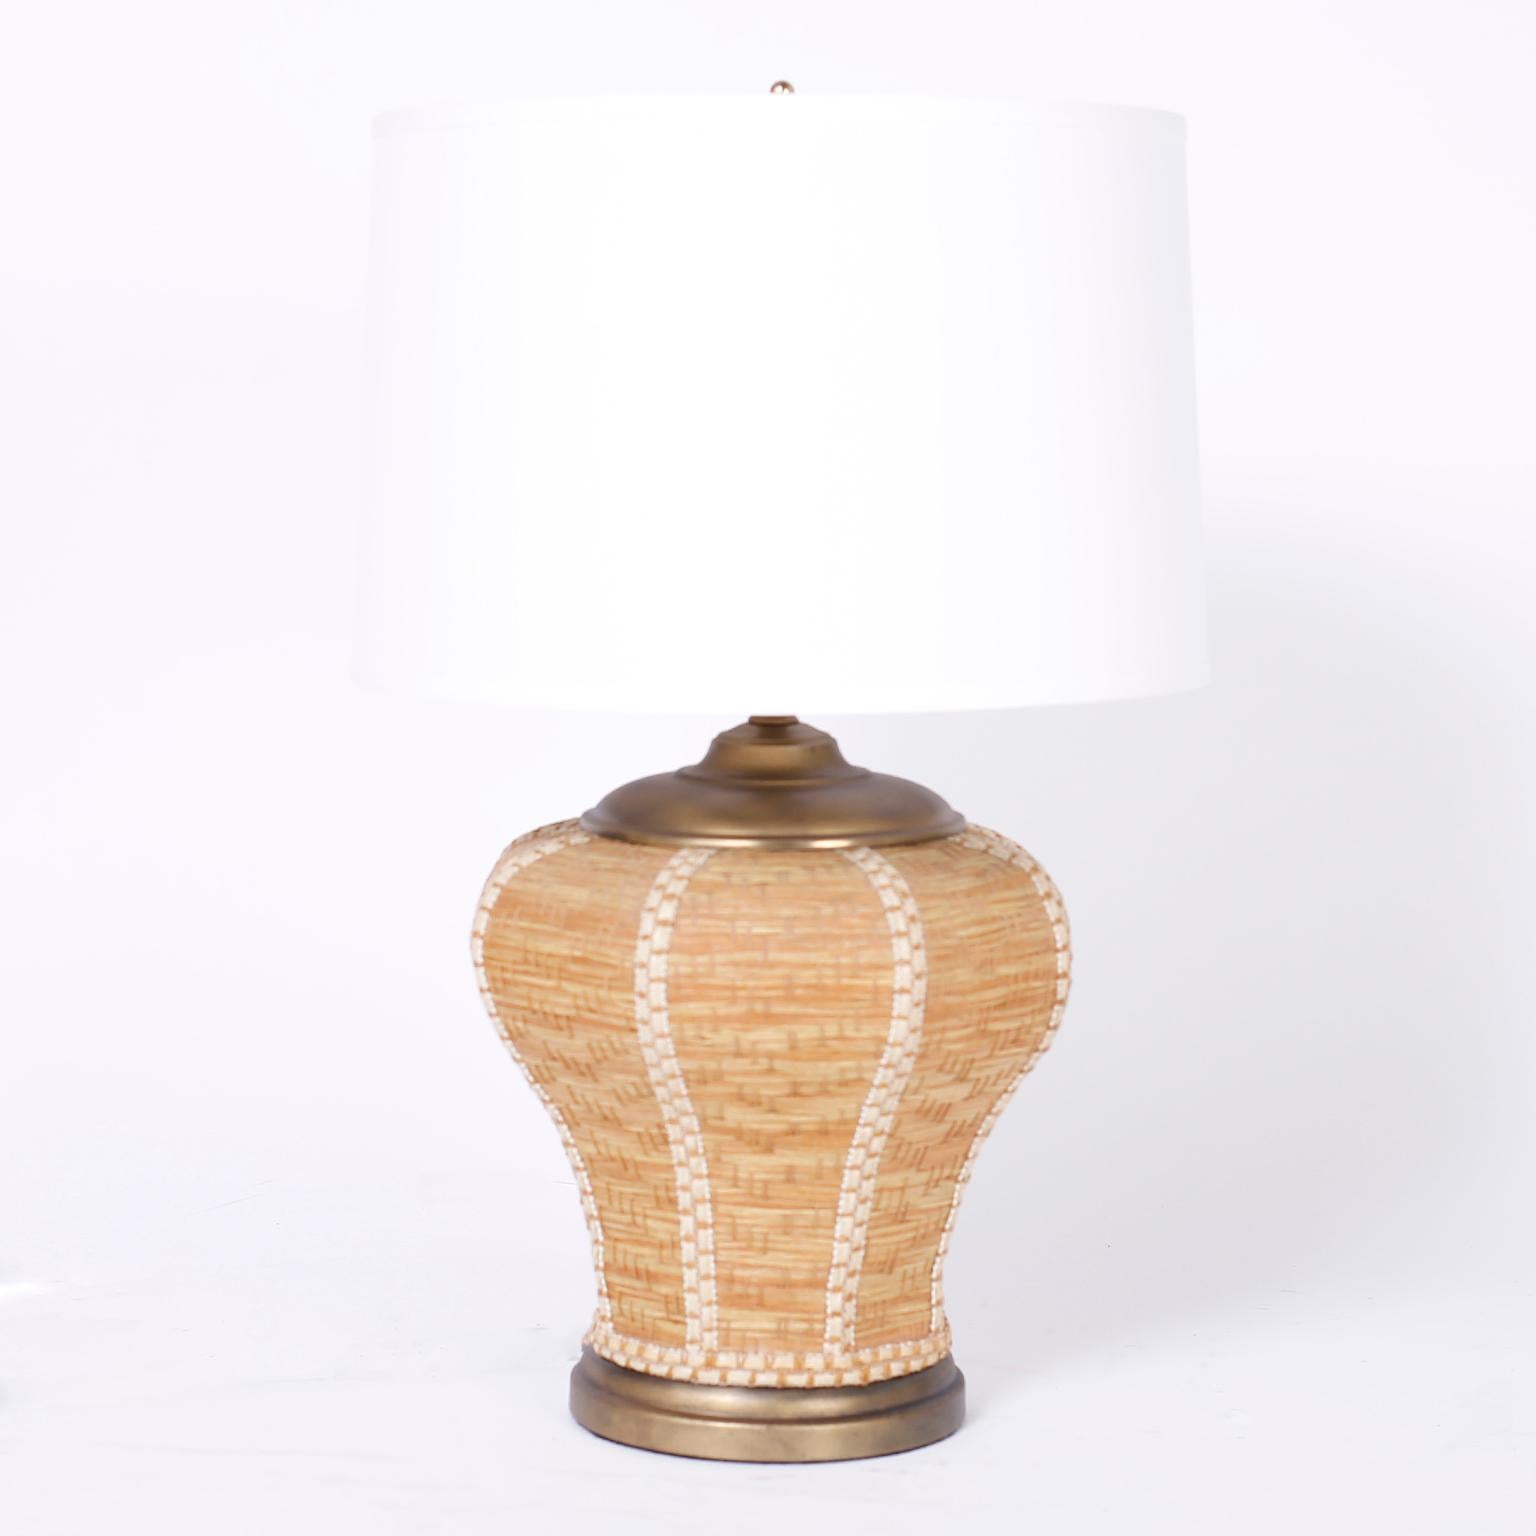 Pair of midcentury table lamps with Classic form and organic ambiance crafted in wicker with an unusual weave pattern and burnished brass caps and bases.